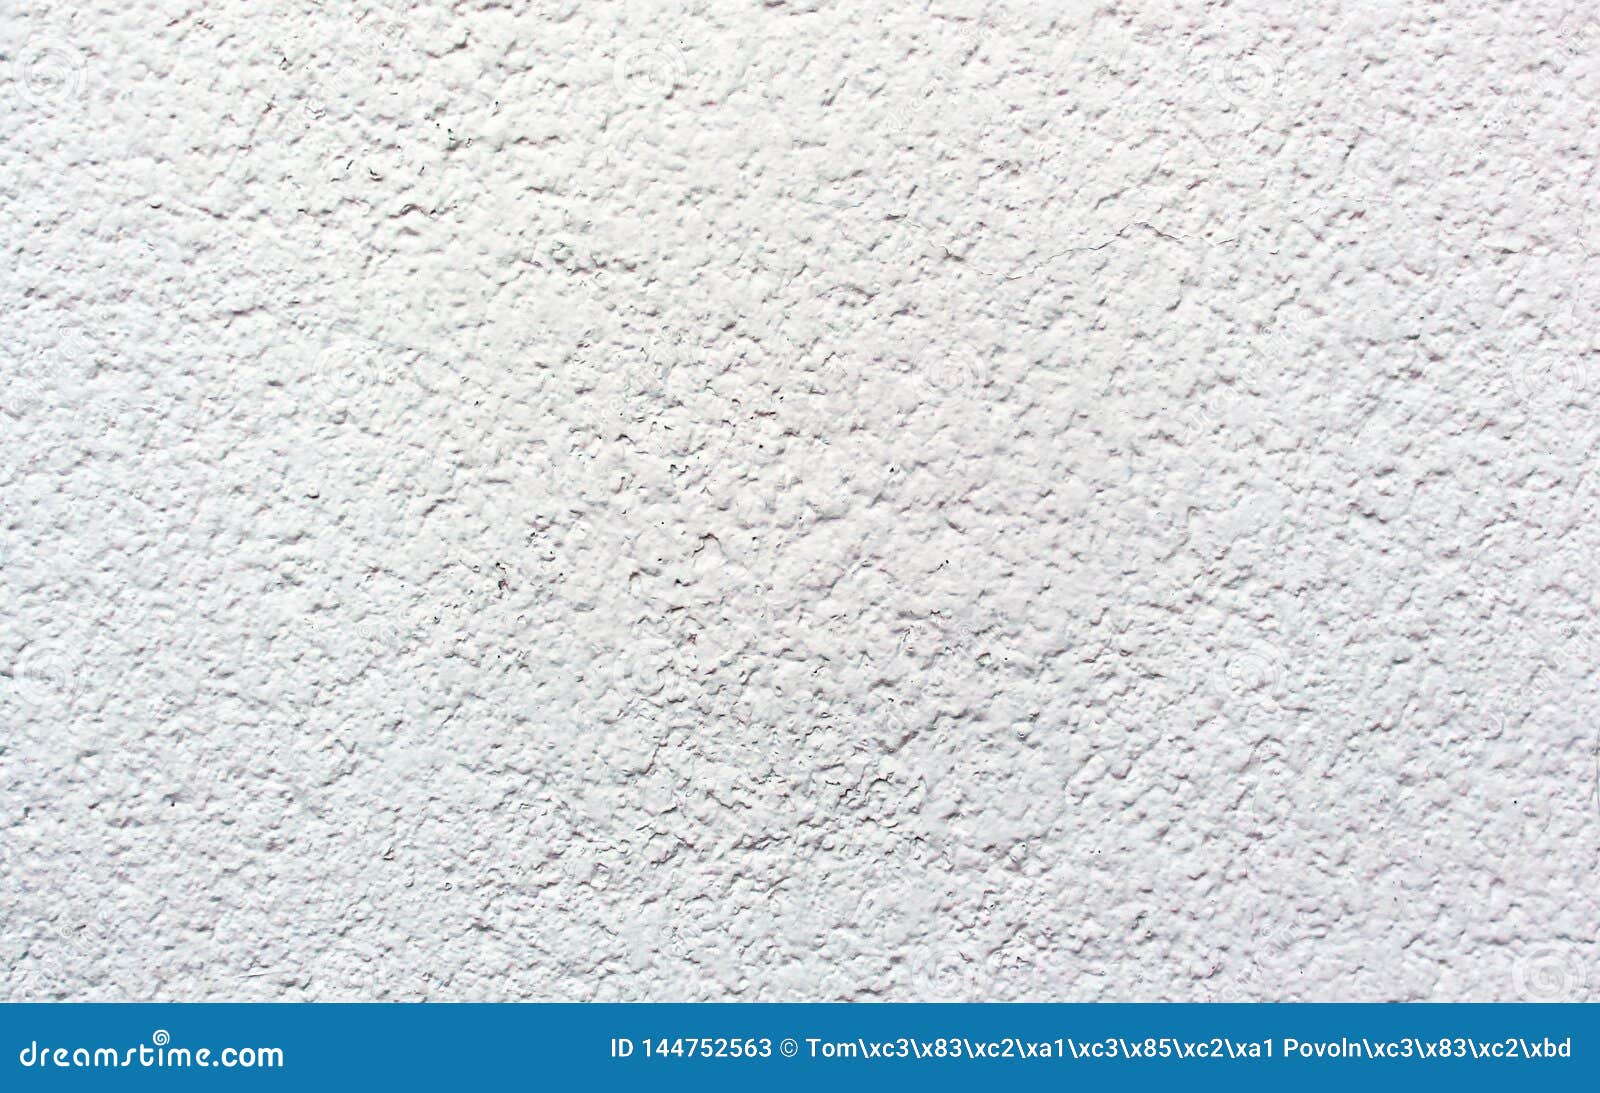 White Cement Old Wall Texture Plastered Stucco Stock Image